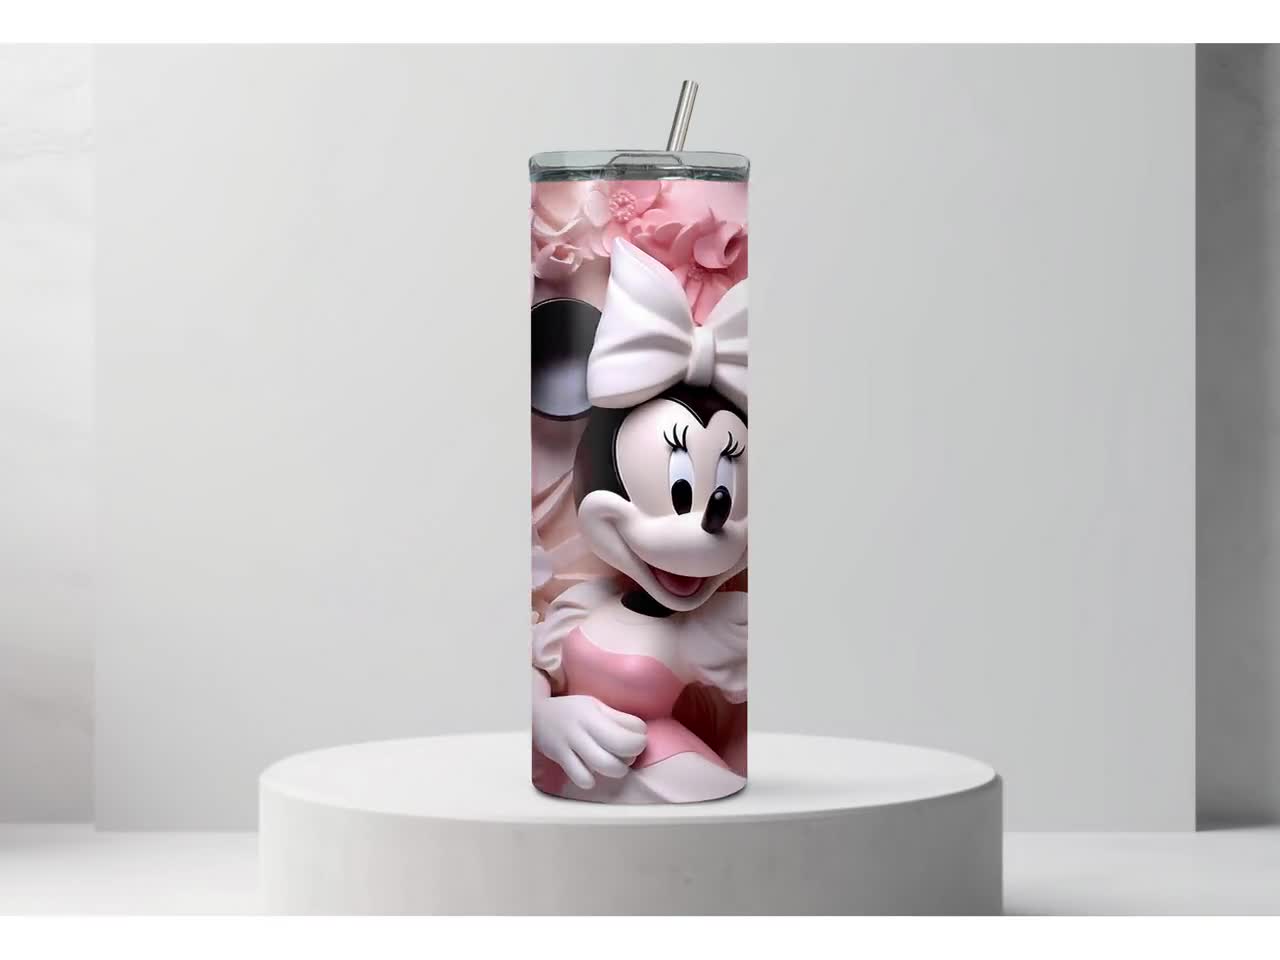 Character Inspired 20 Oz Tumbler Princess Castle Iced Coffee Cup Park  Hopper Cup Mouse Cartoon Inspired Watercolor 